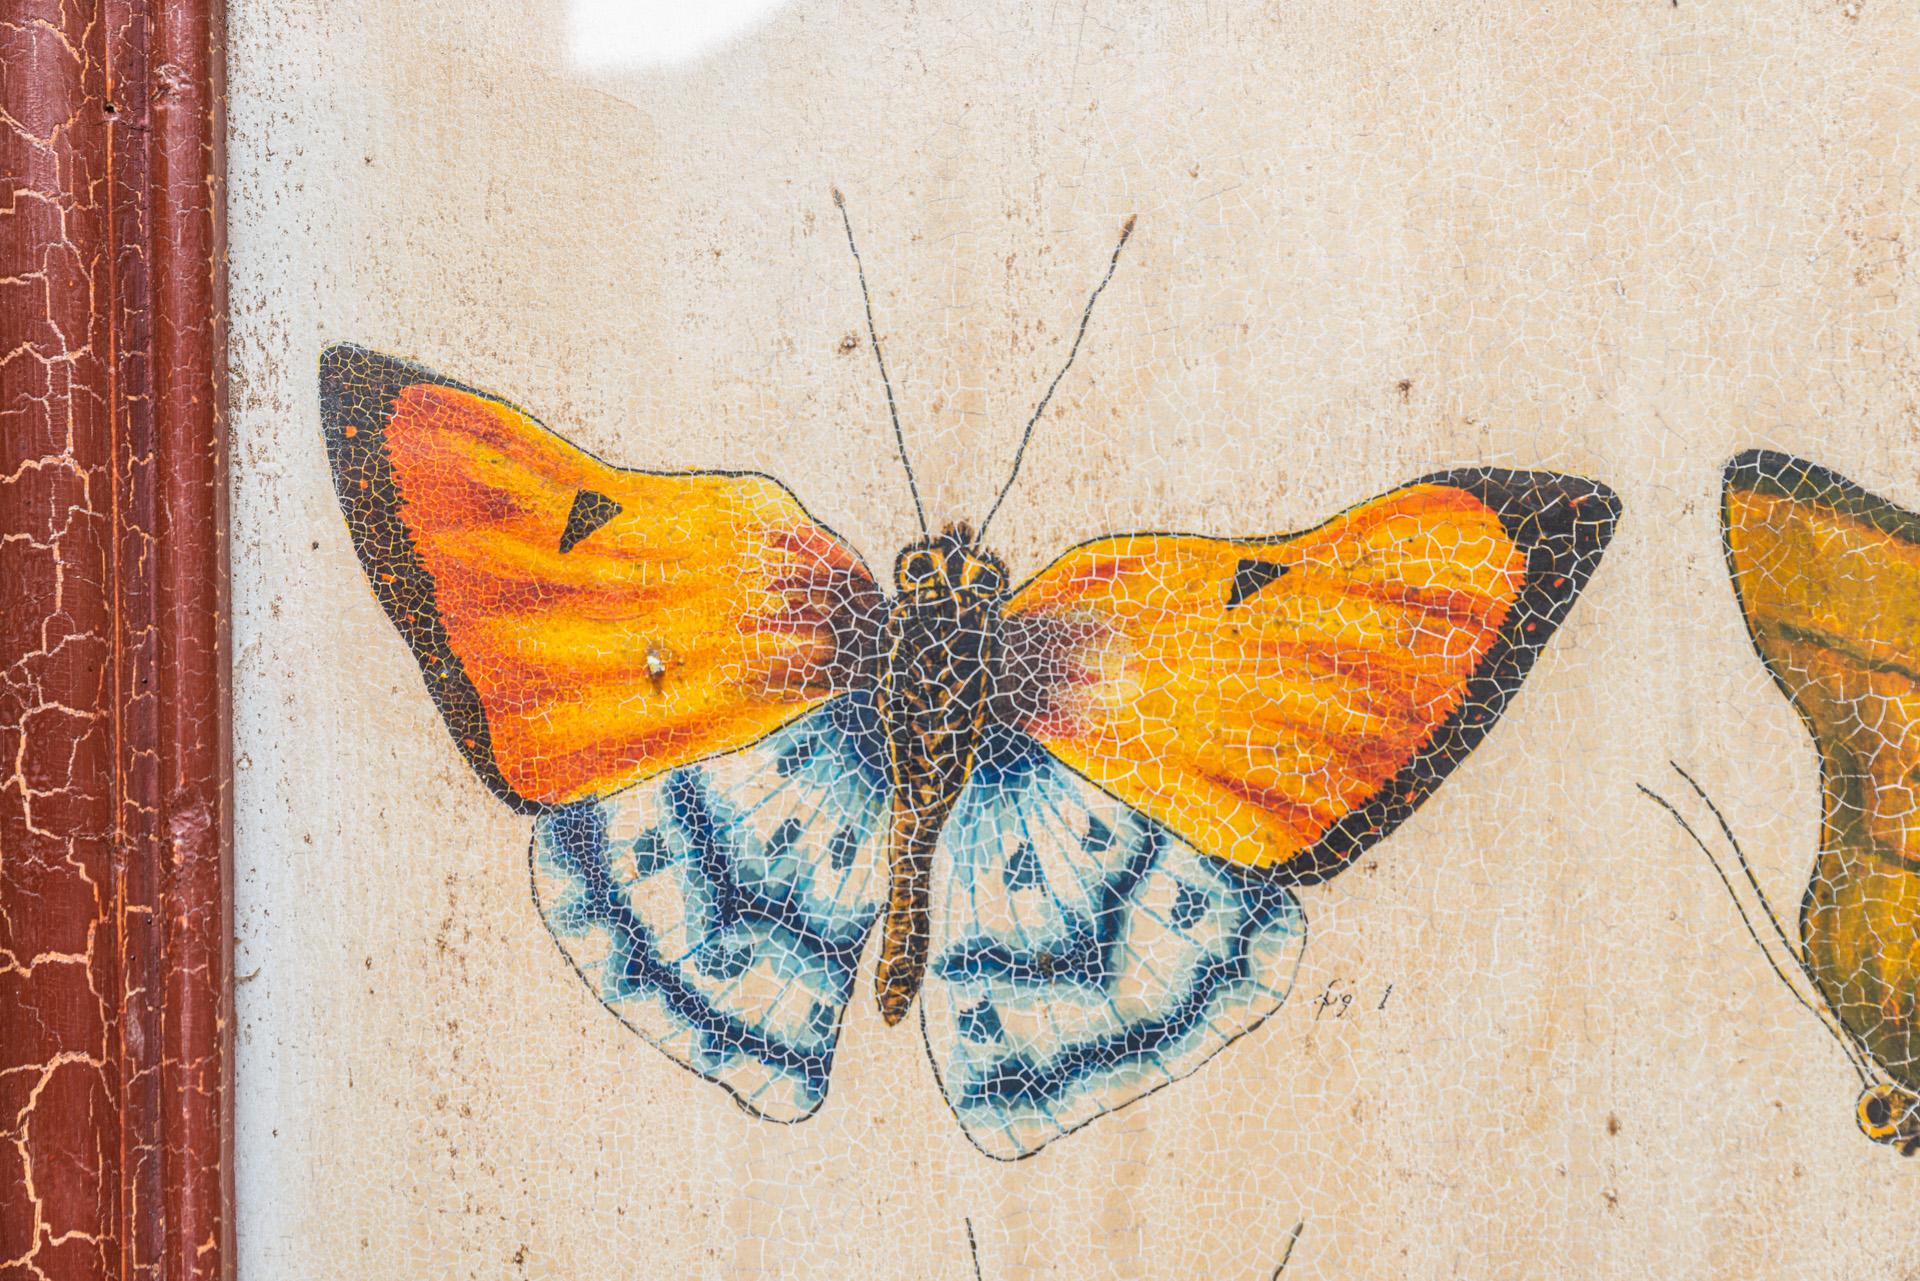 Entomology, study of butterflies according to nature, 
Oil on panel,
Framing with butterflies name,
Cracked varnish,
Modern frame in molded wood, 
circa 1950, France. 

Measures: Height 118 cm, width 77 cm.